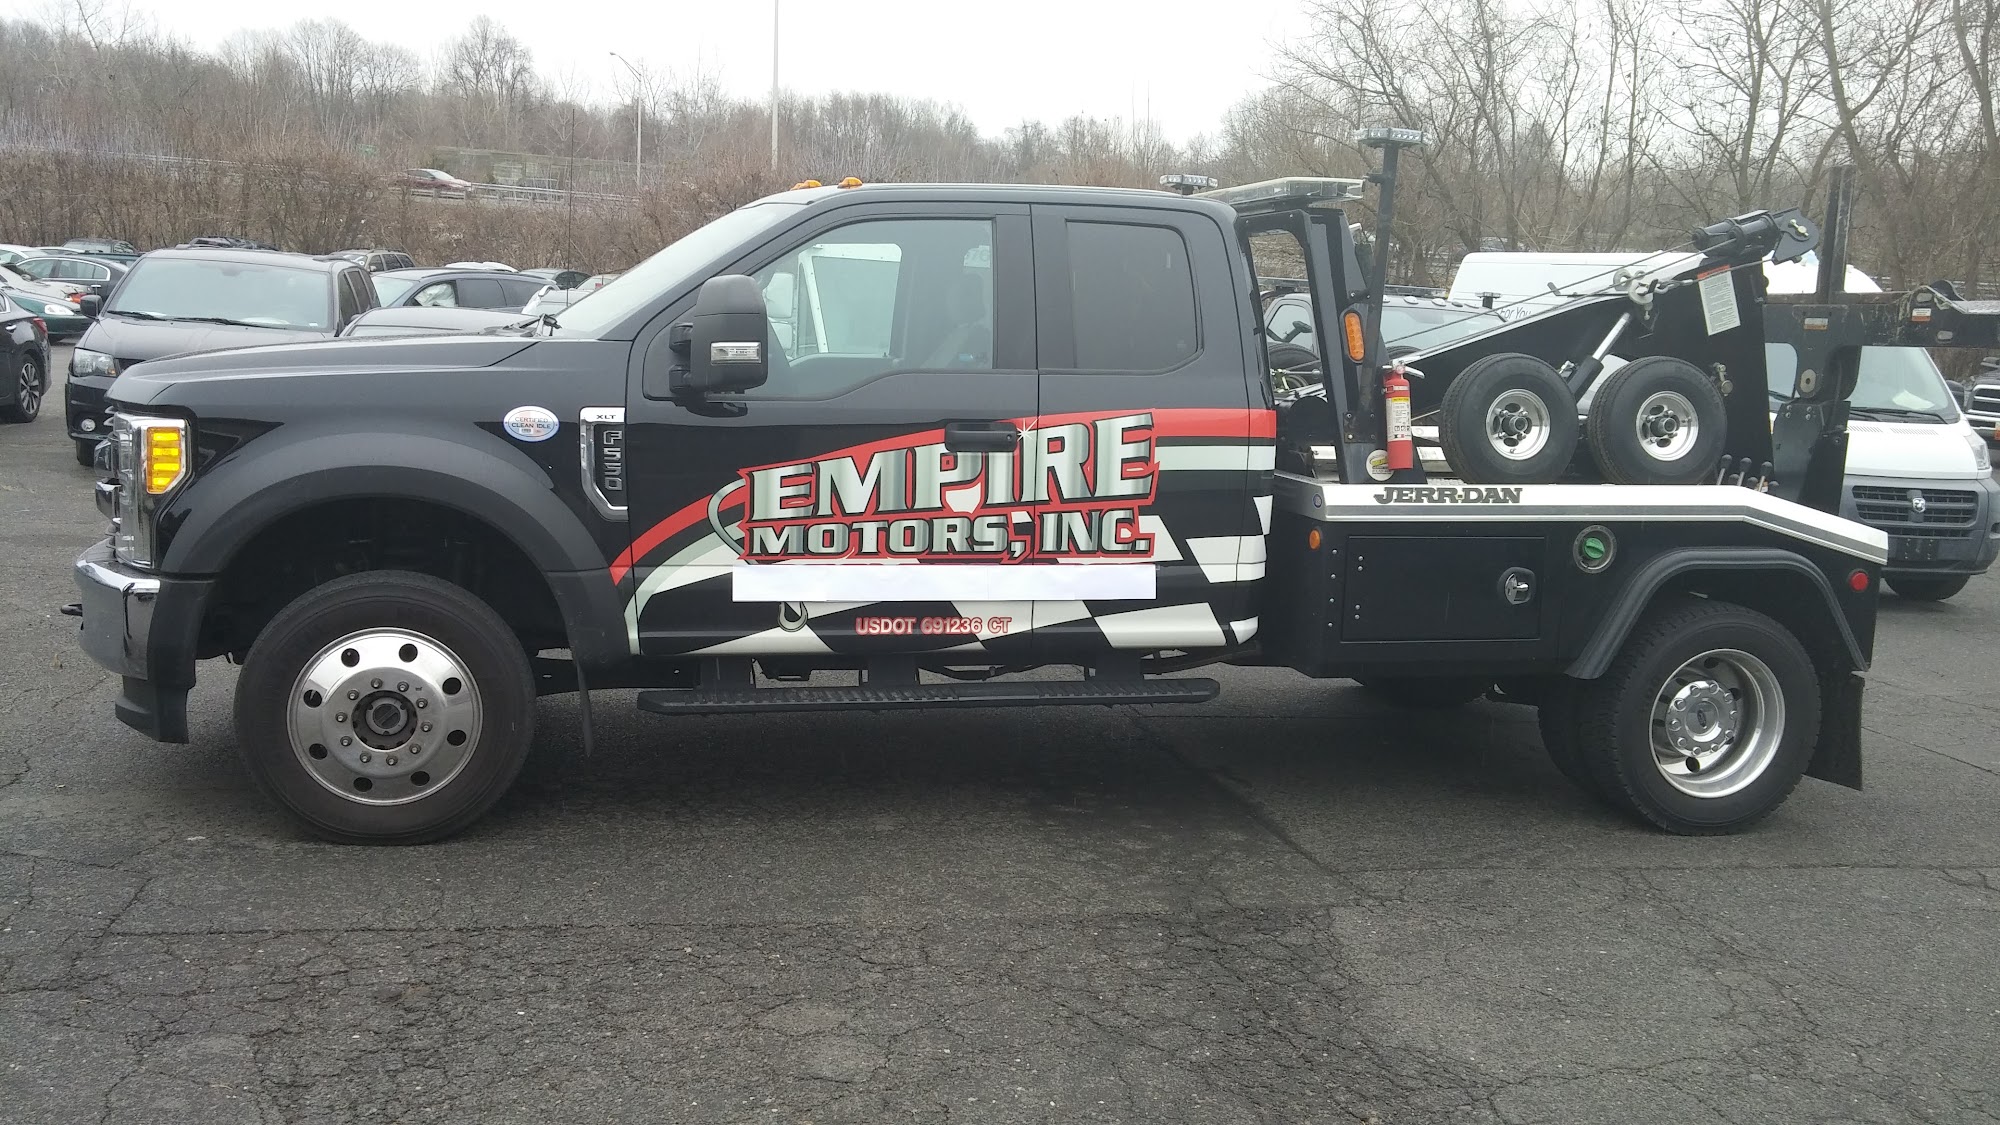 Empire Towing